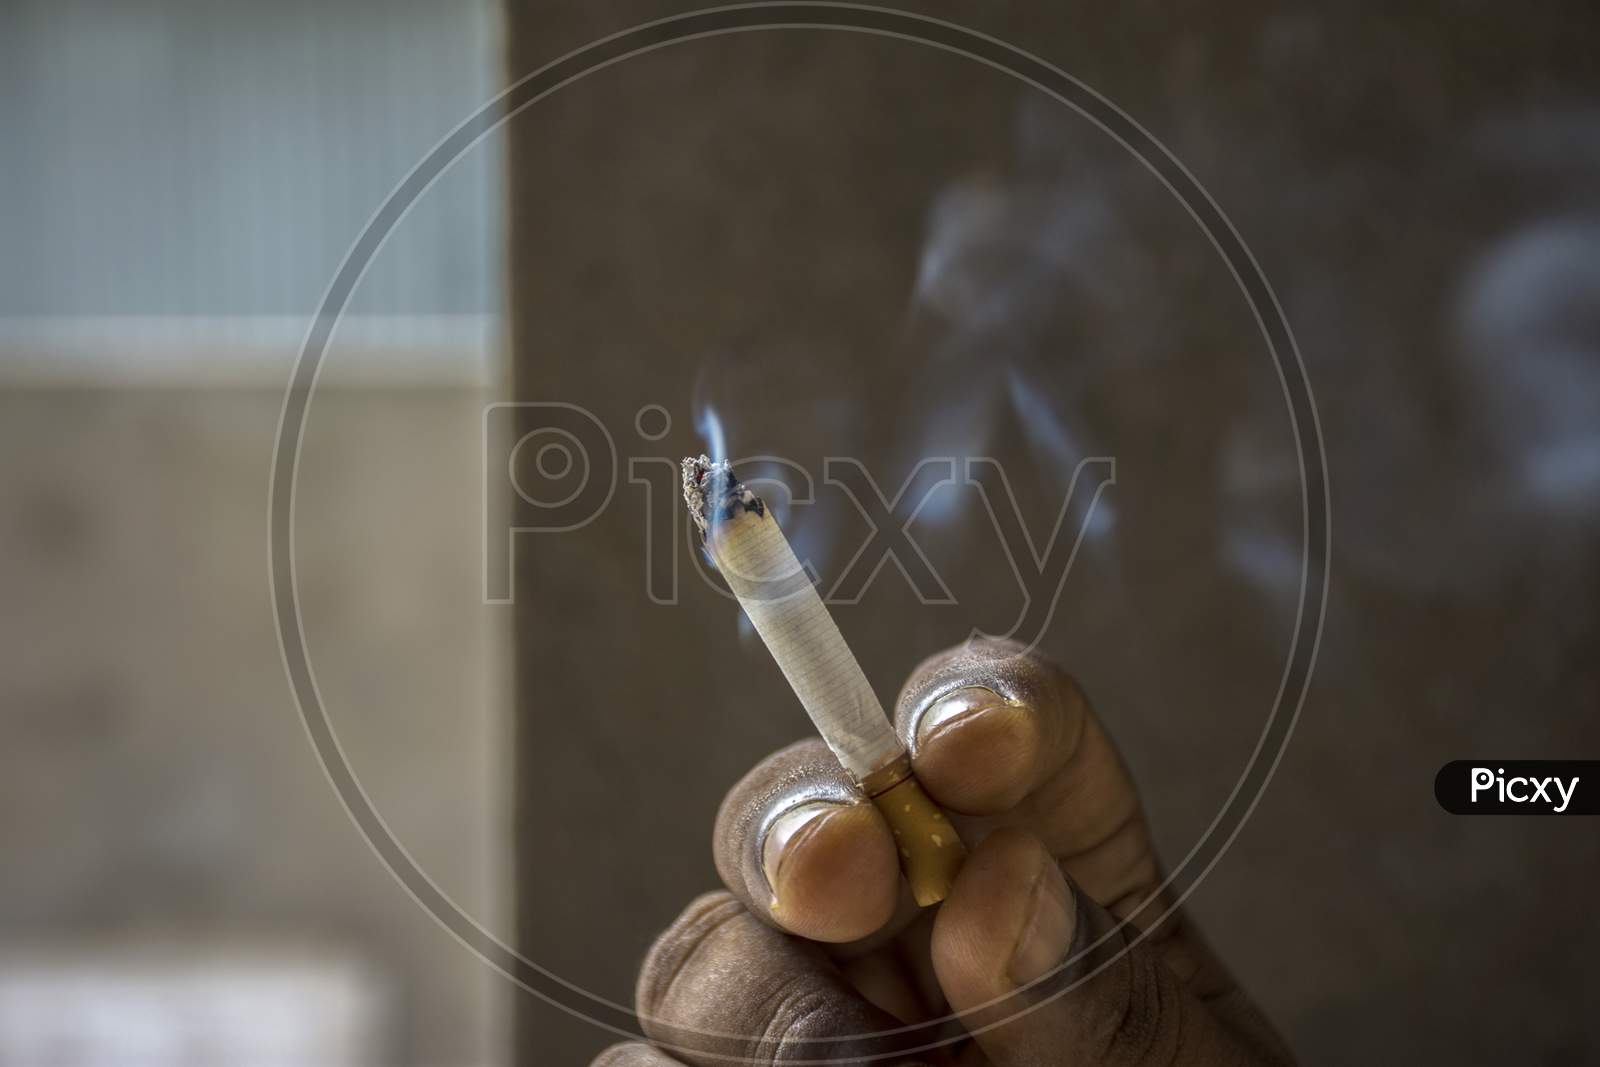 White Burning Cigarette With Smoke In A Hand